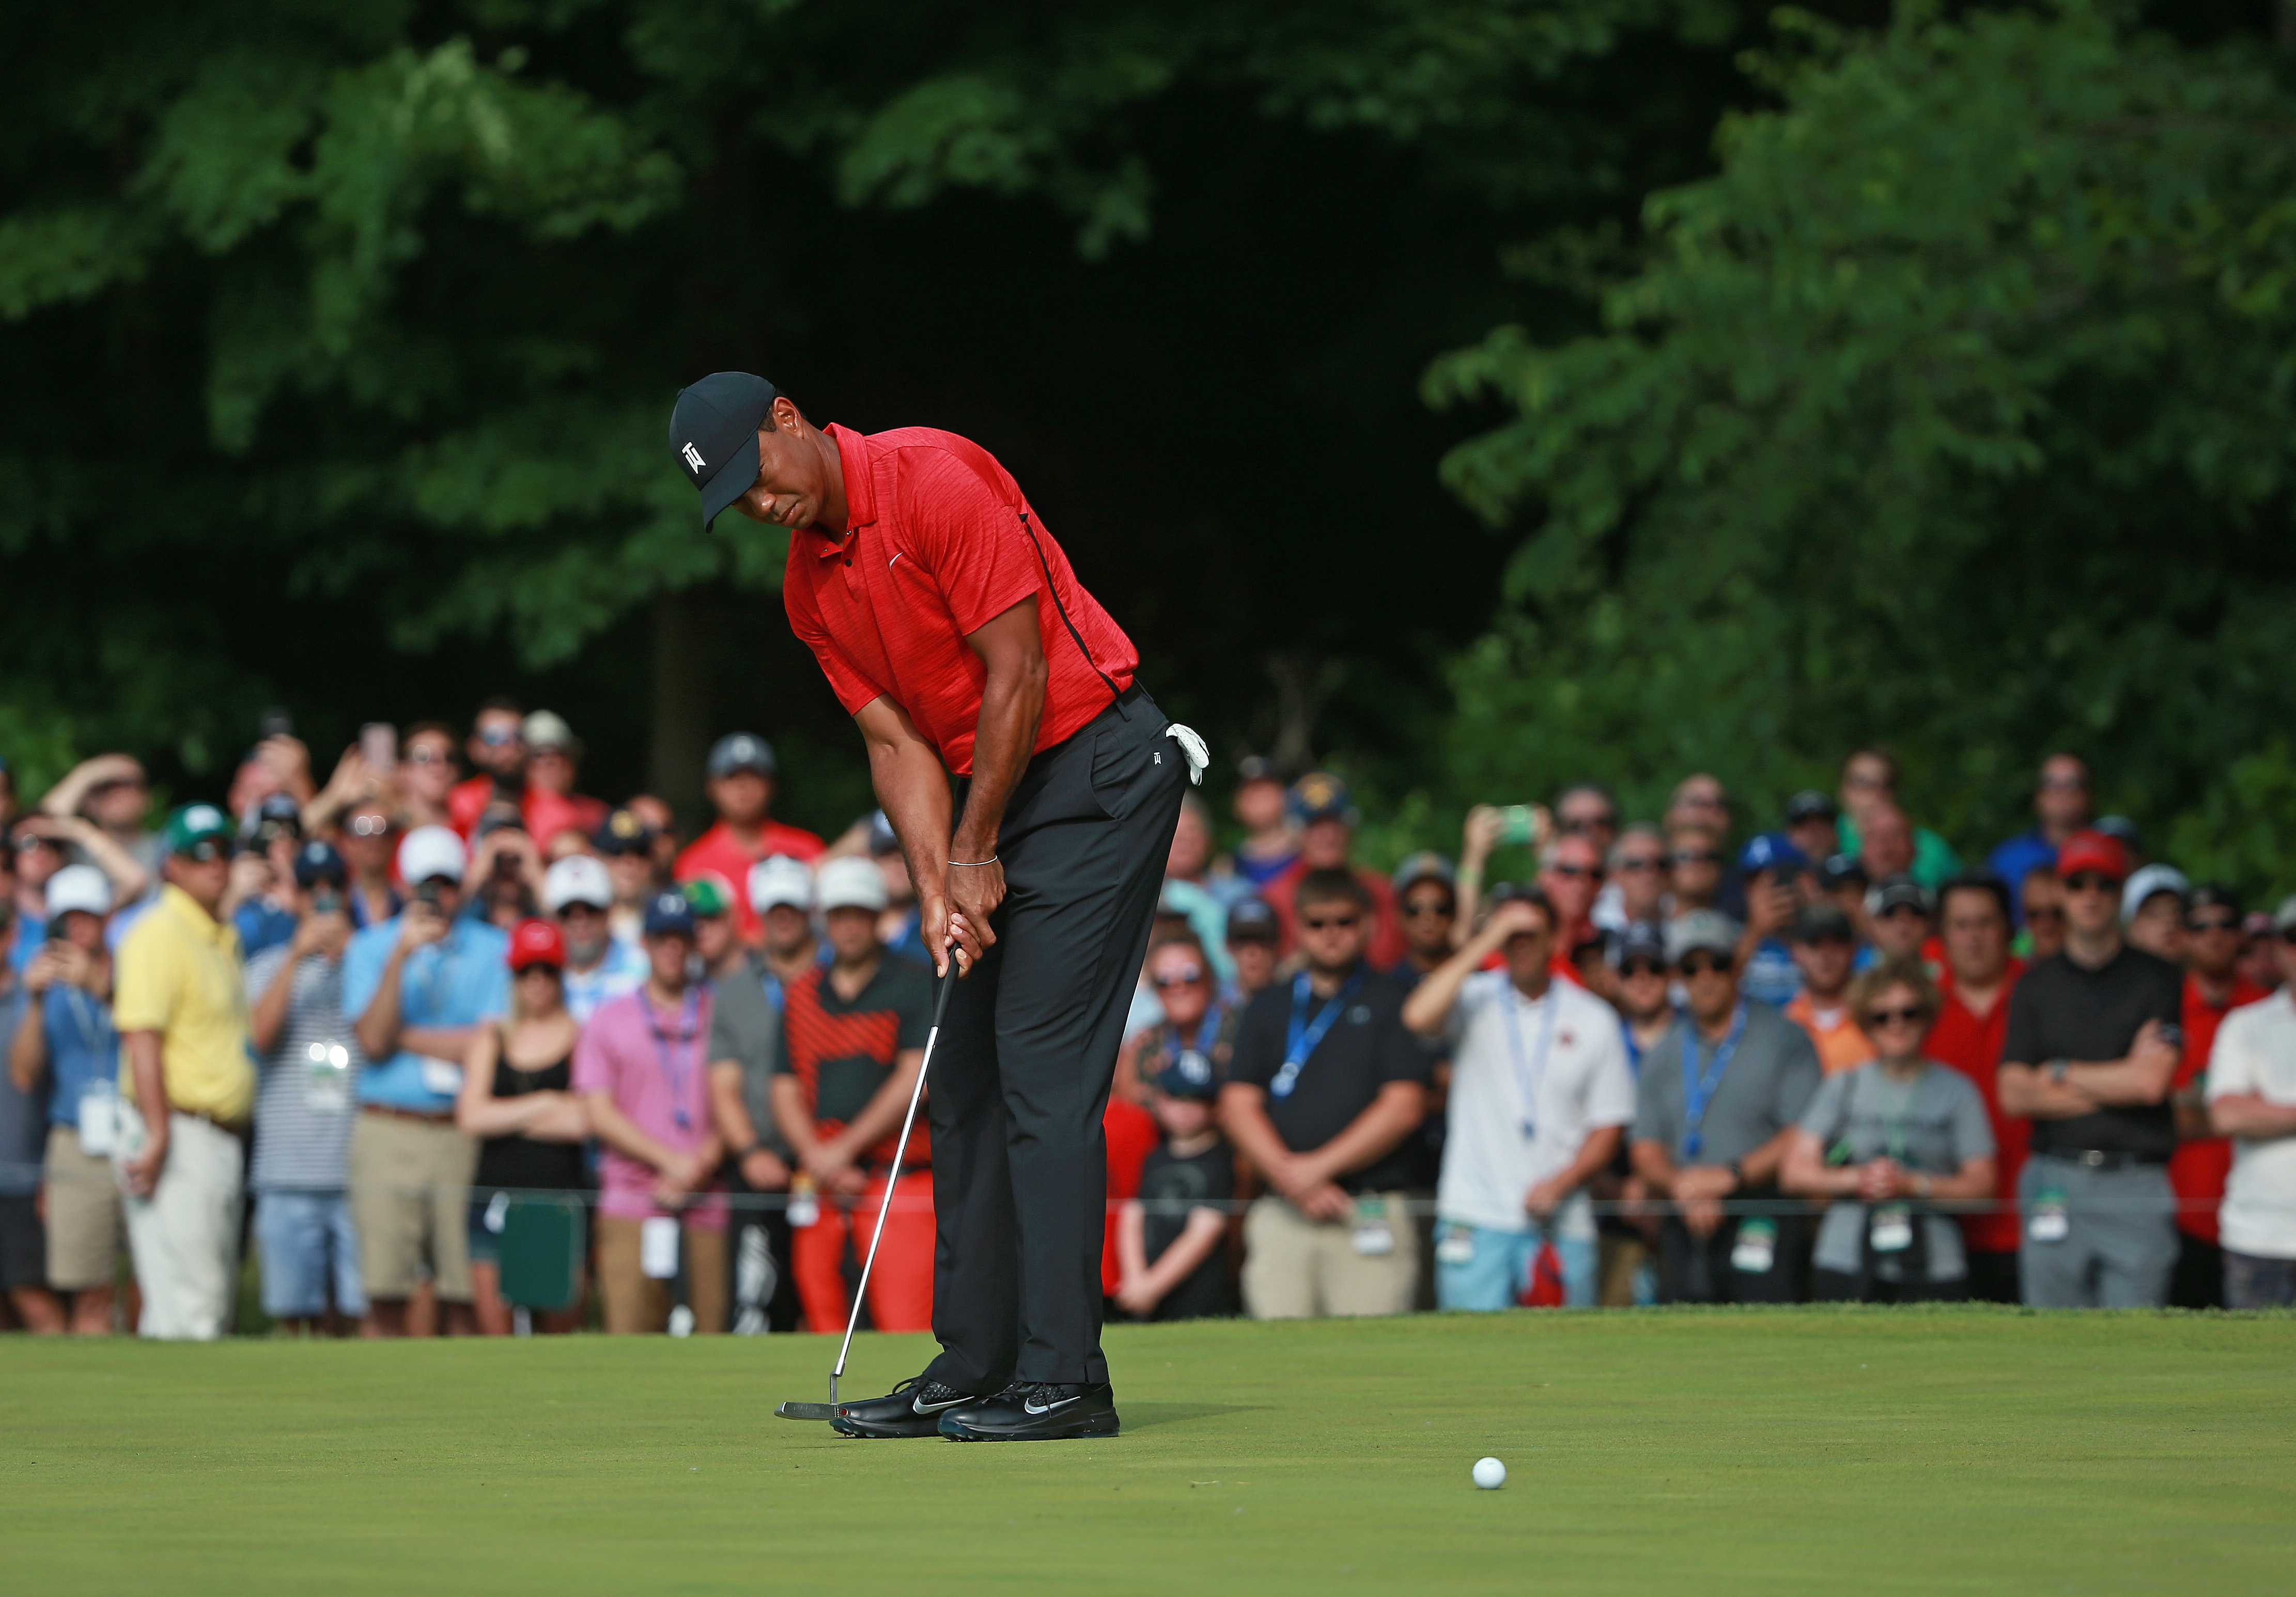 Tiger Woods reveals pros and cons after T23 finish at Memorial